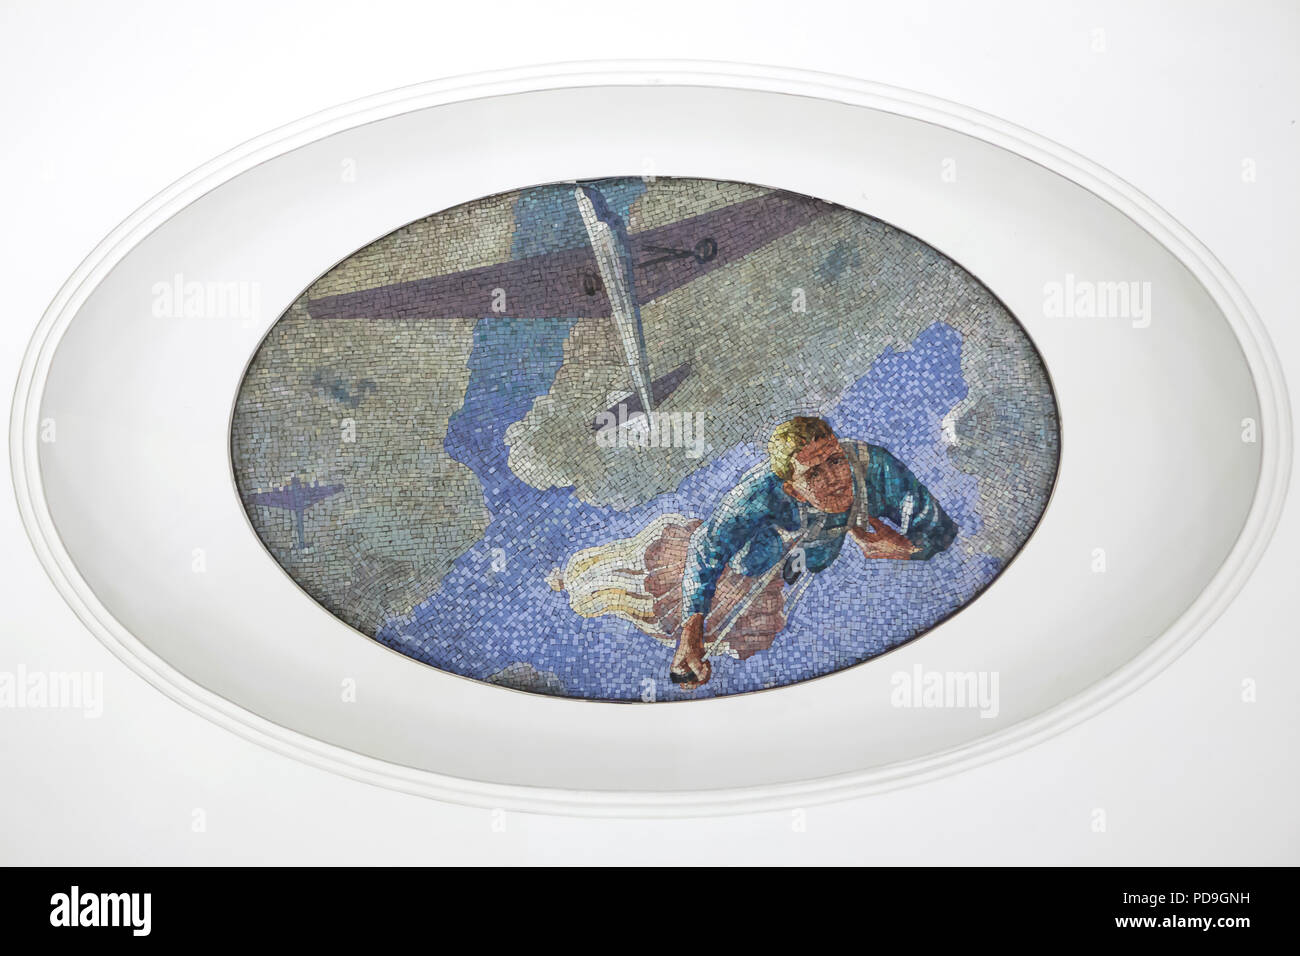 Parachutist jumping from the glider depicted in the ceiling mosaic designed by Soviet artist Alexander Deyneka in the Mayakovskaya metro station in Moscow, Russia. One of the mosaics from the set entitled Twenty-four Hours in the Soviet Sky assembled by Russian mosaic master Vladimir Frolov in the 1930s. Stock Photo